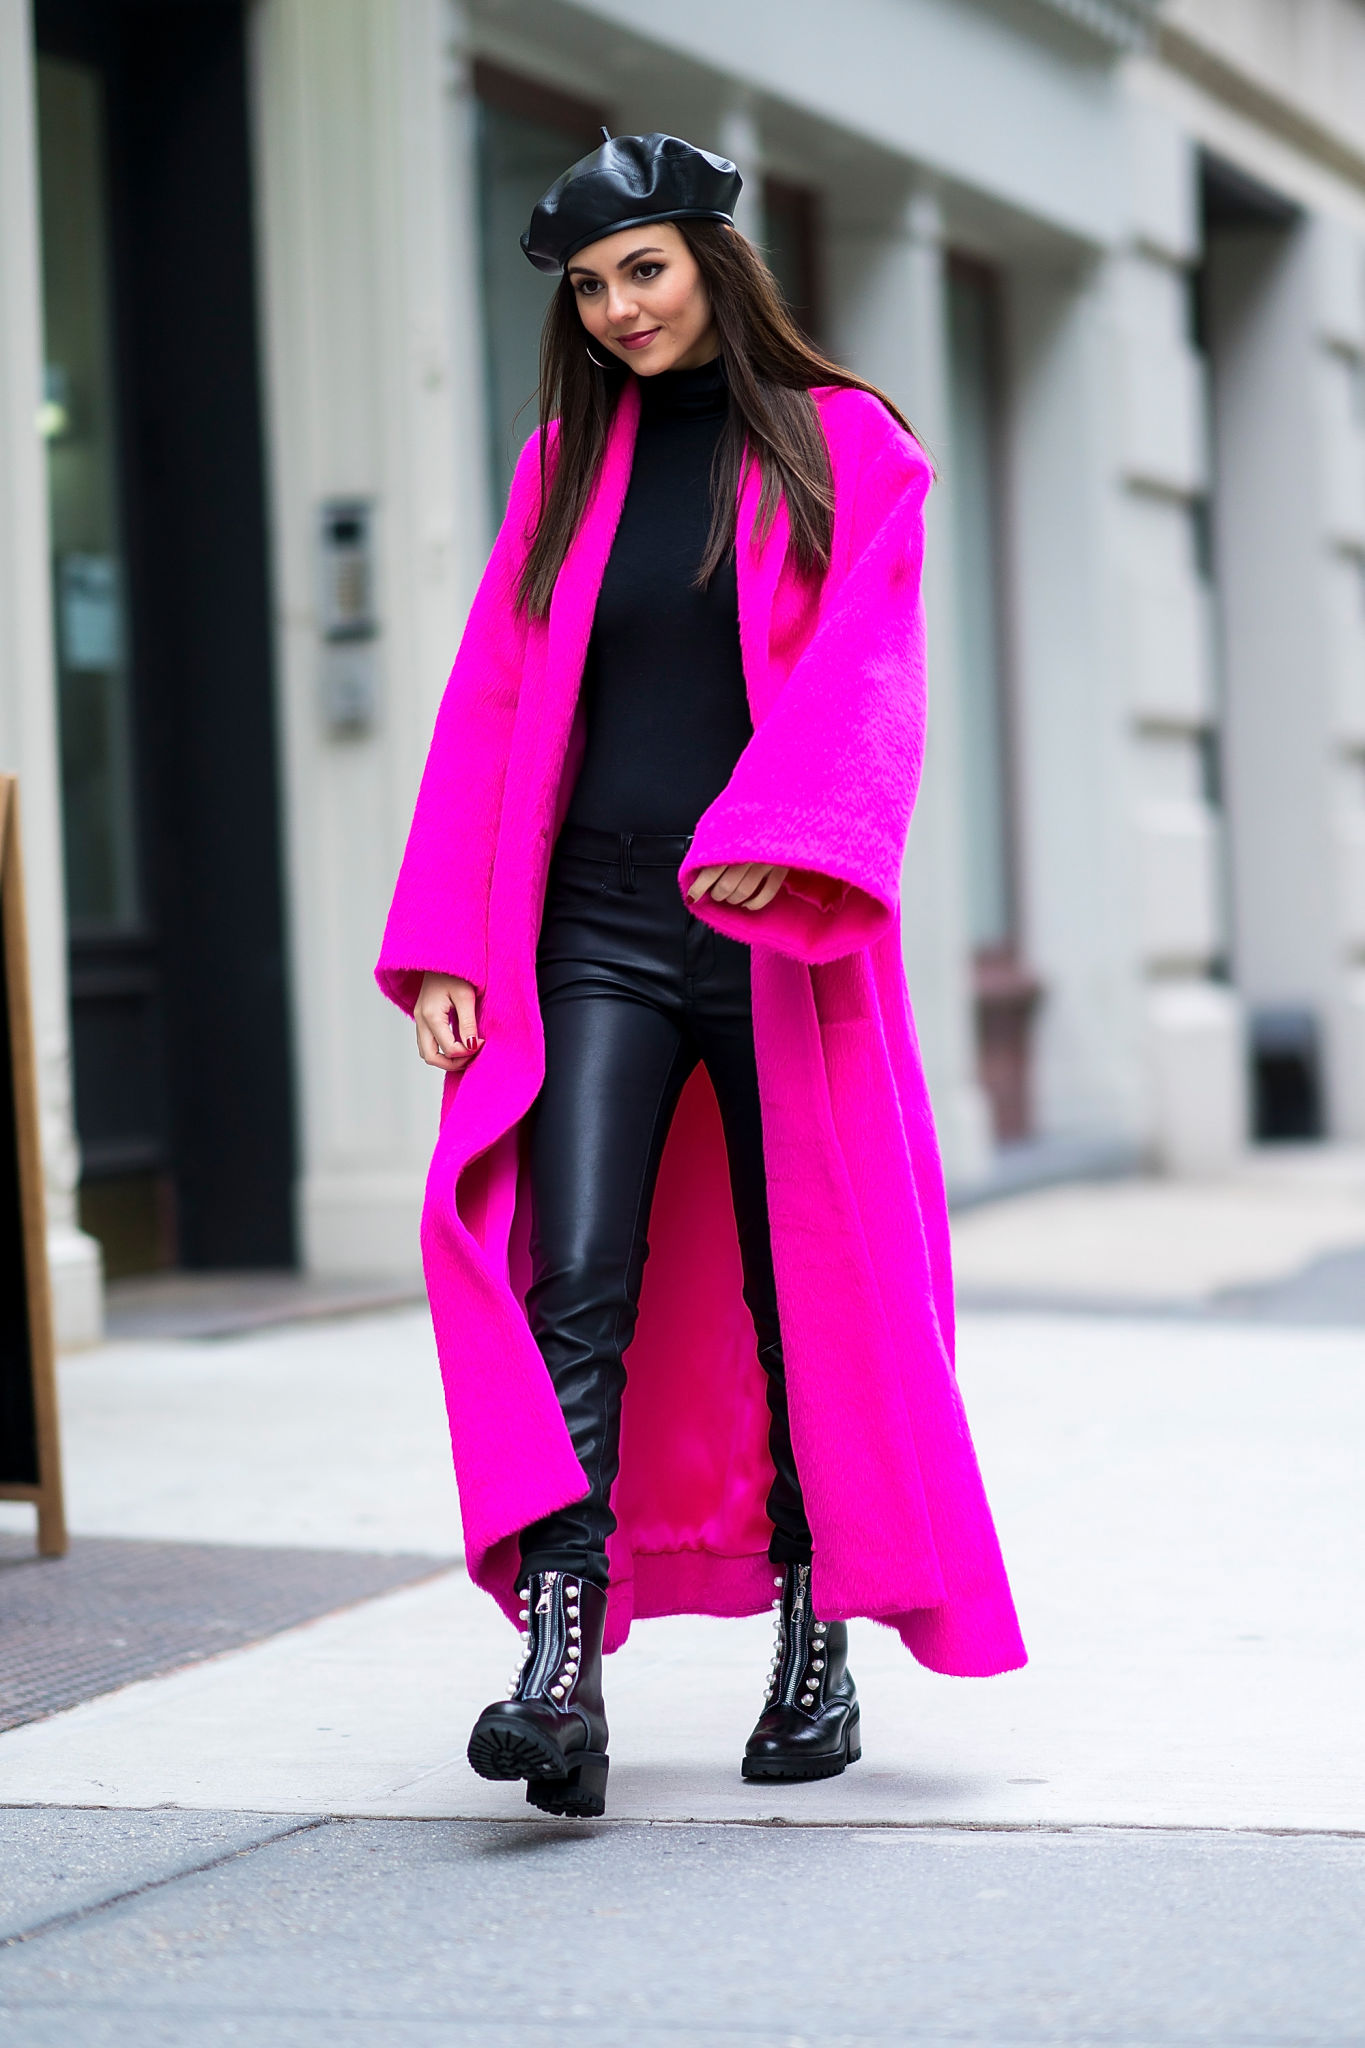 Victoria Justice out in NYC